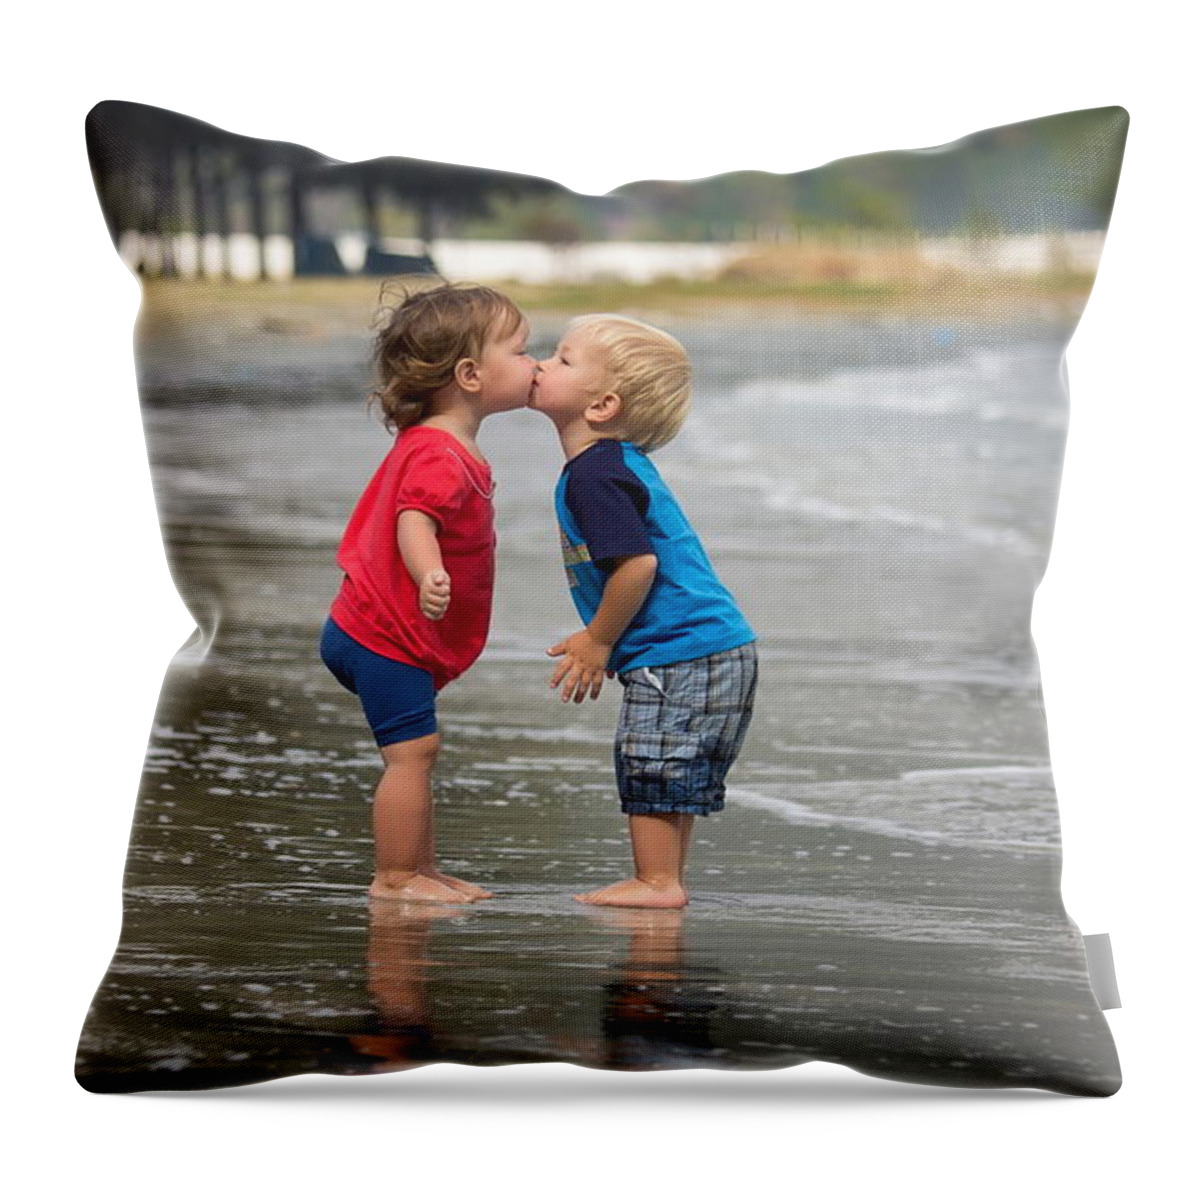 Child Throw Pillow featuring the digital art Child by Maye Loeser